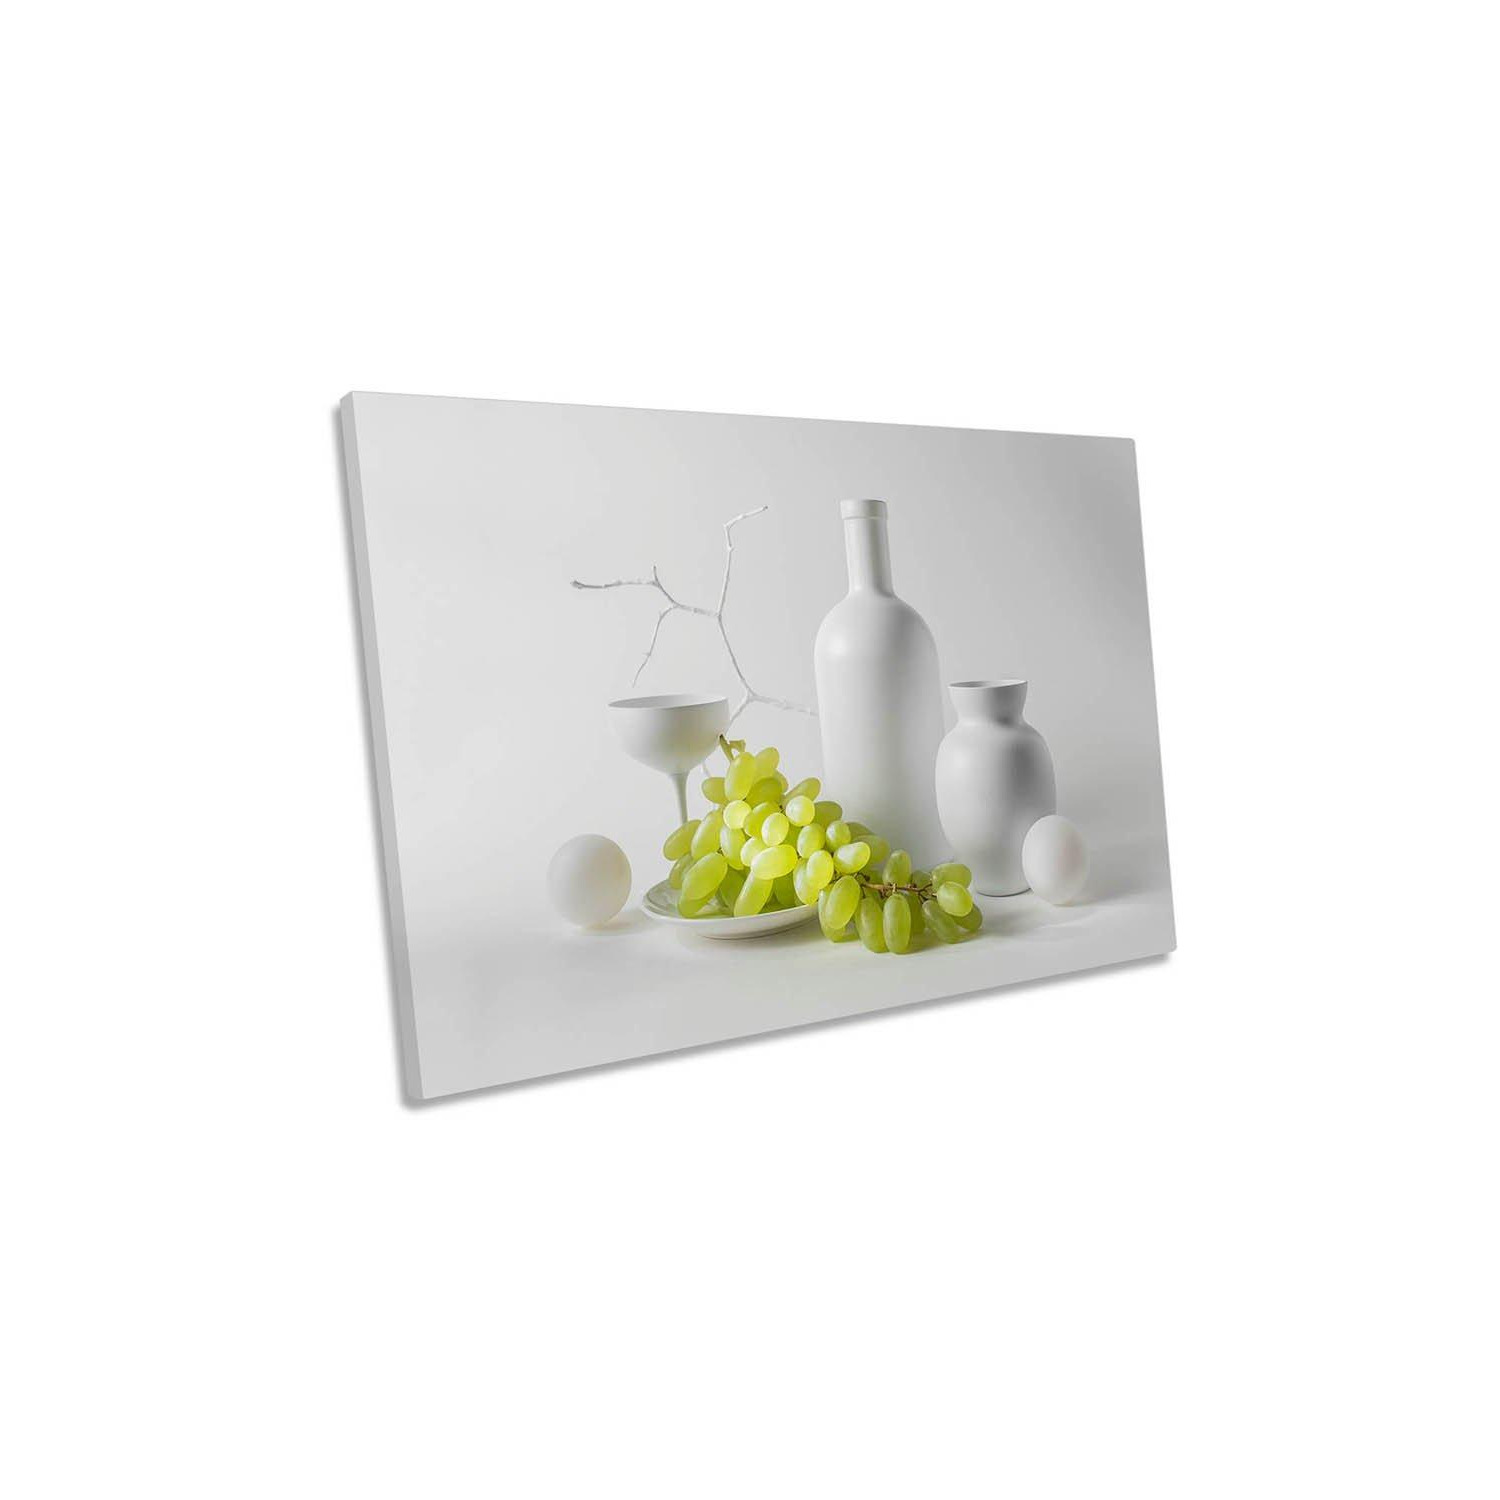 White Vase and Green Grapes Still Life Kitchen Canvas Wall Art Picture Print - image 1